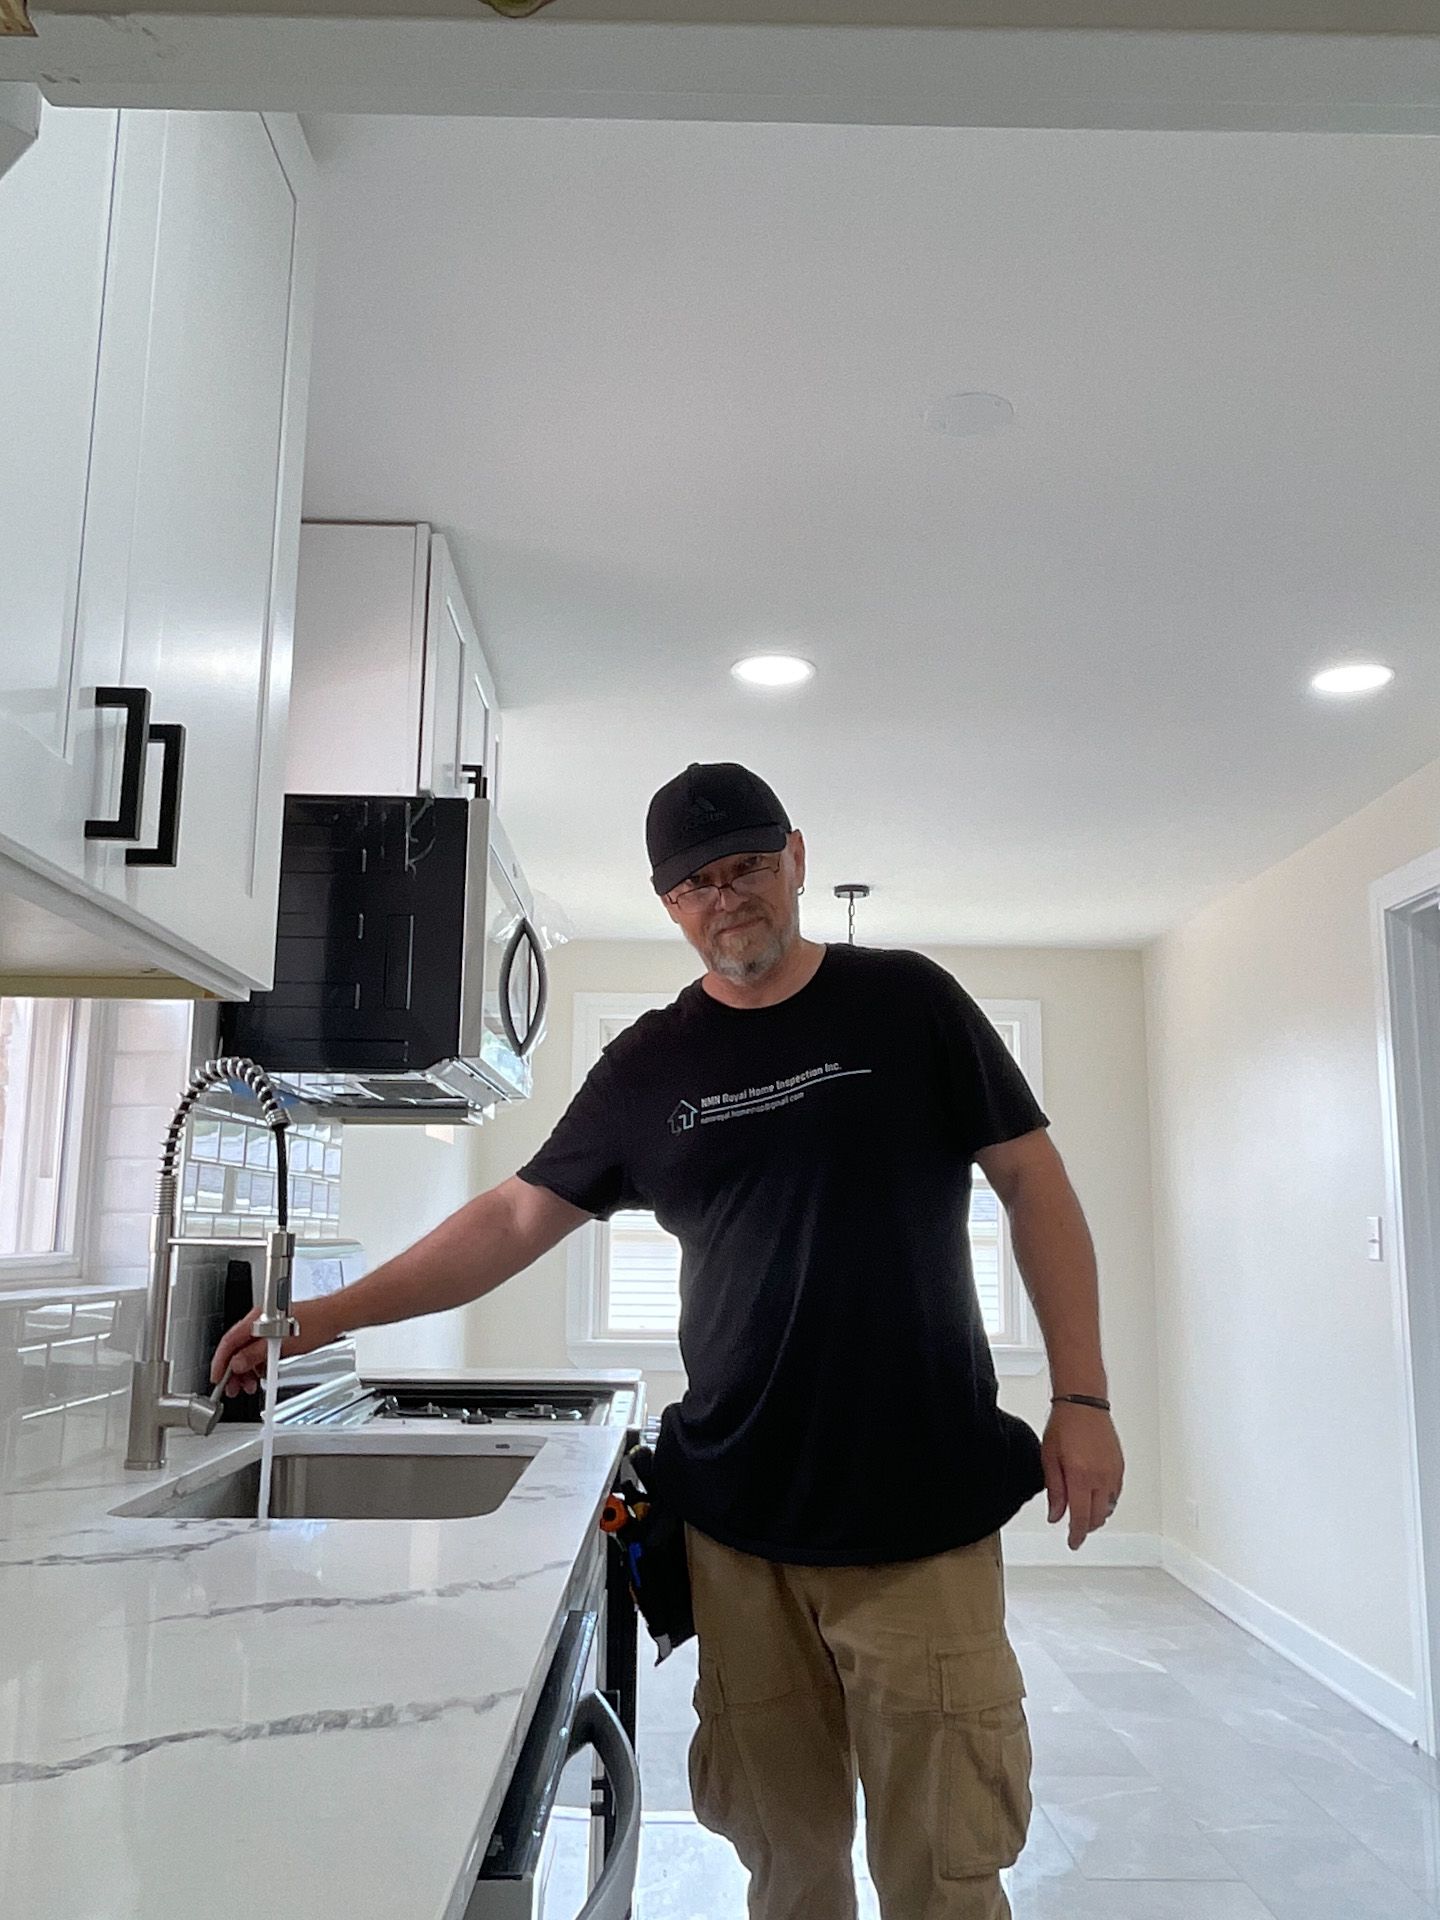 A man in a black shirt is standing in a kitchen next to a sink.